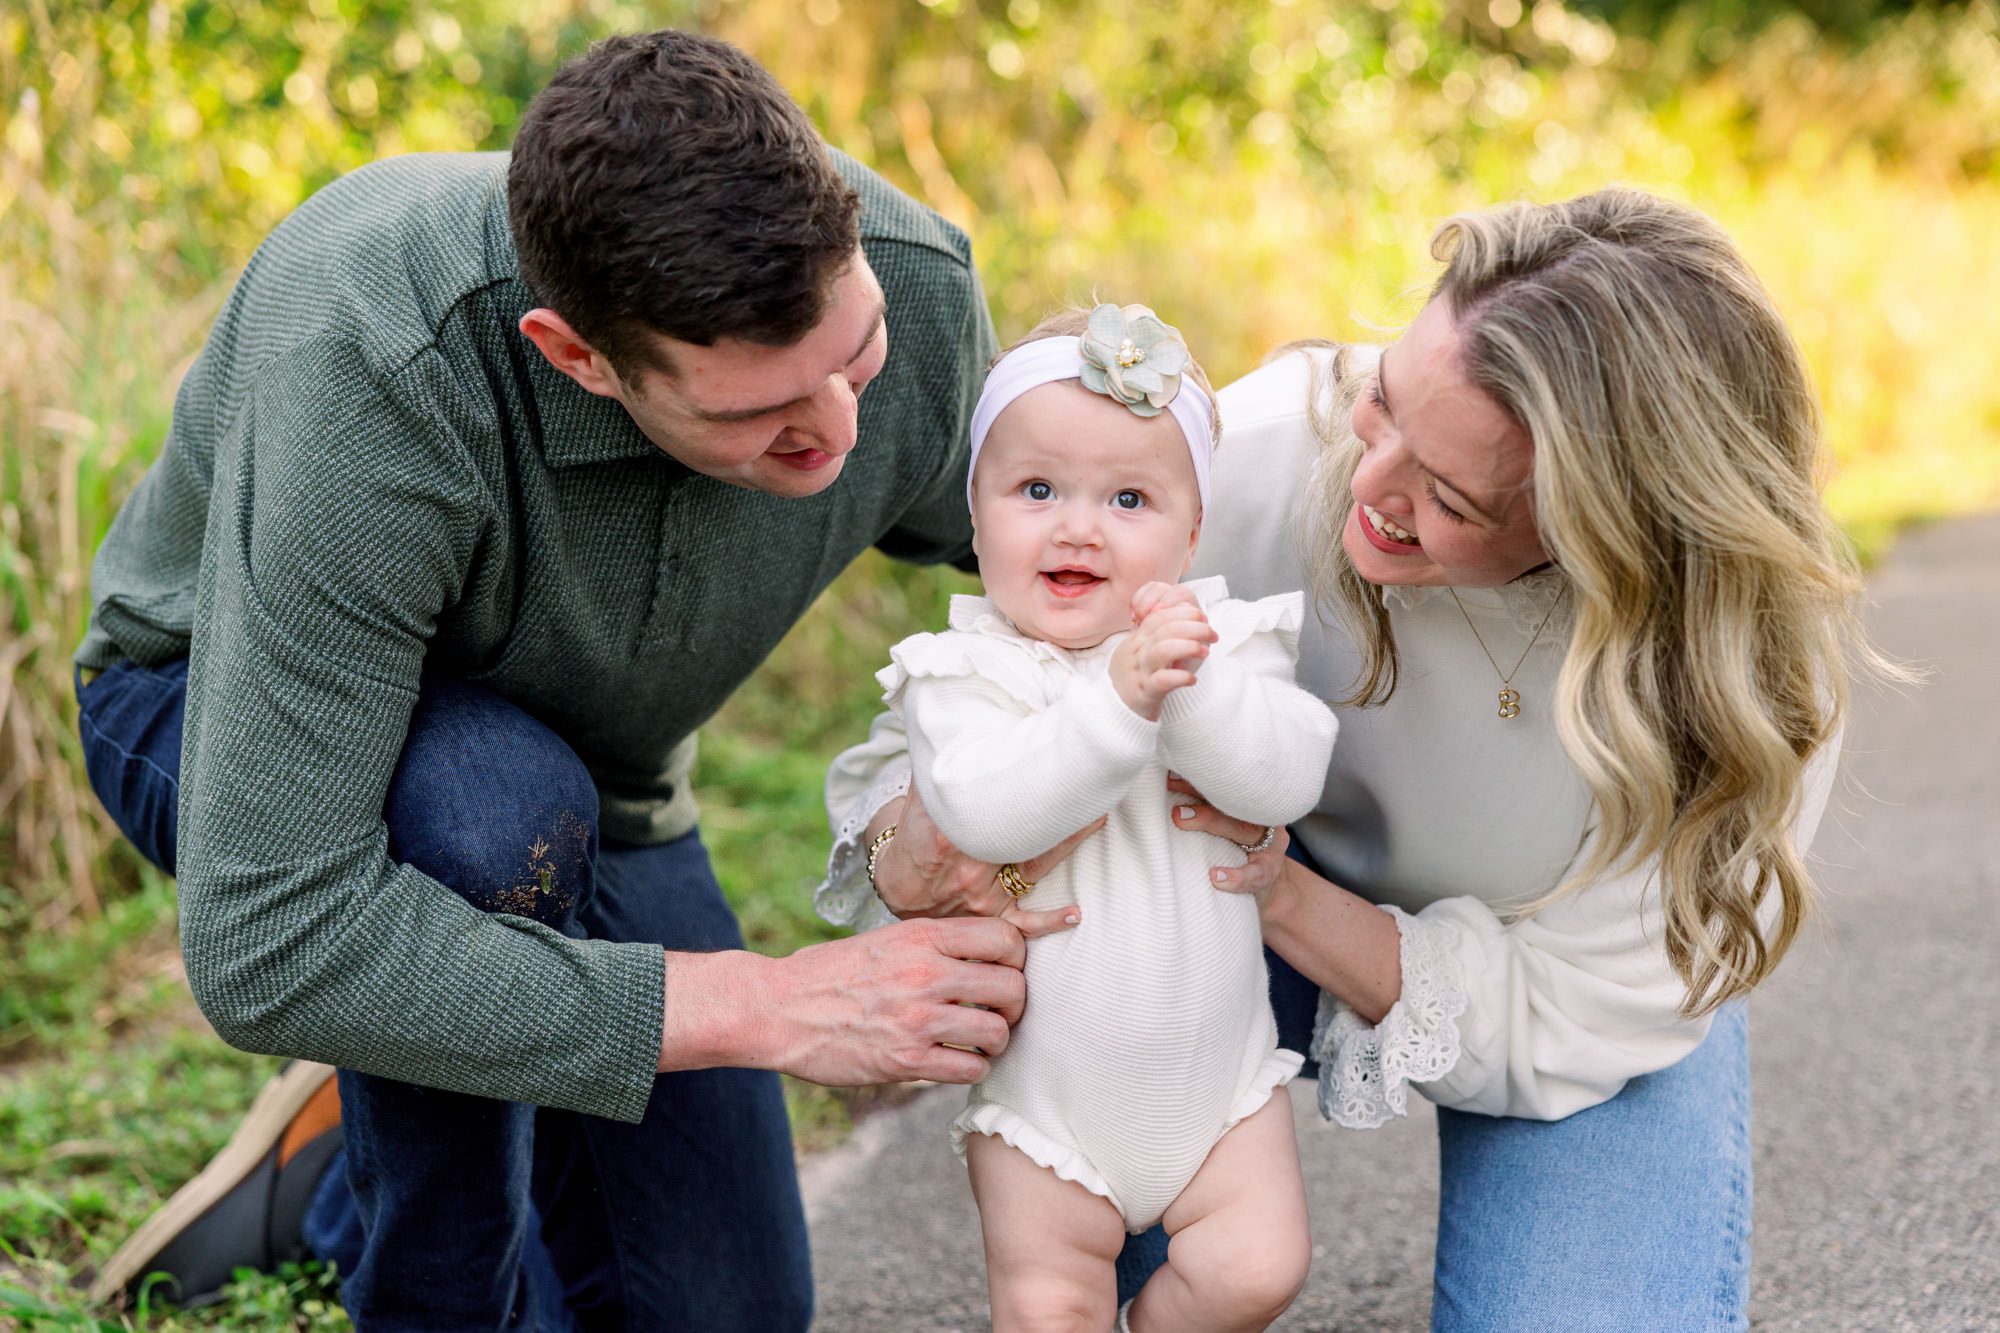 Toddler girl smiling while parents hold her